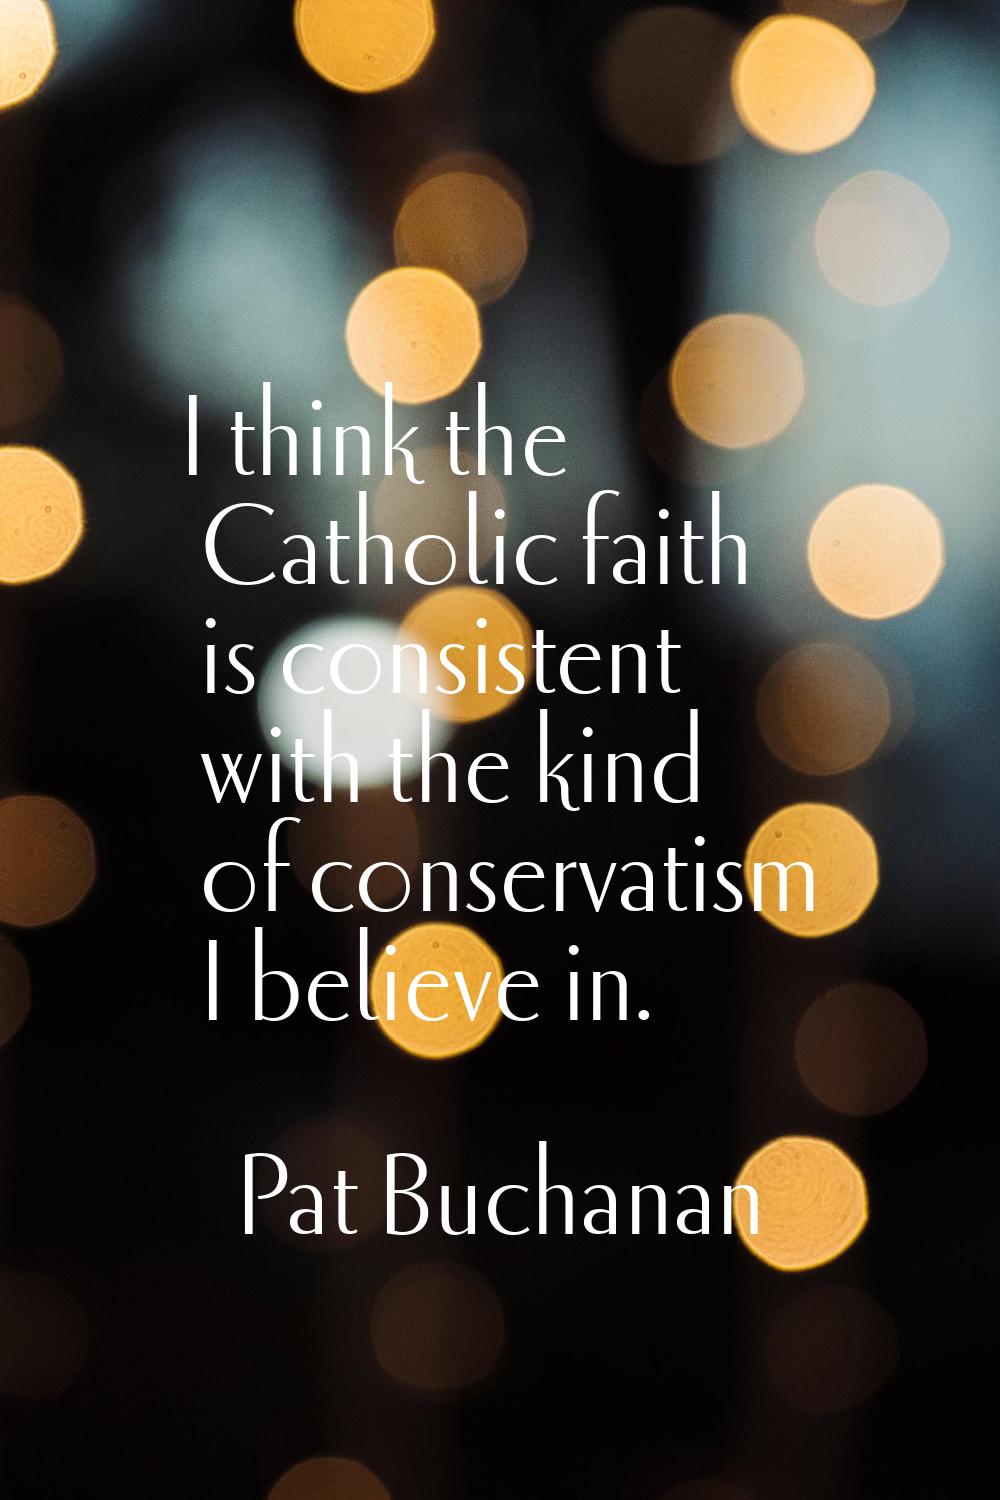 I think the Catholic faith is consistent with the kind of conservatism I believe in.